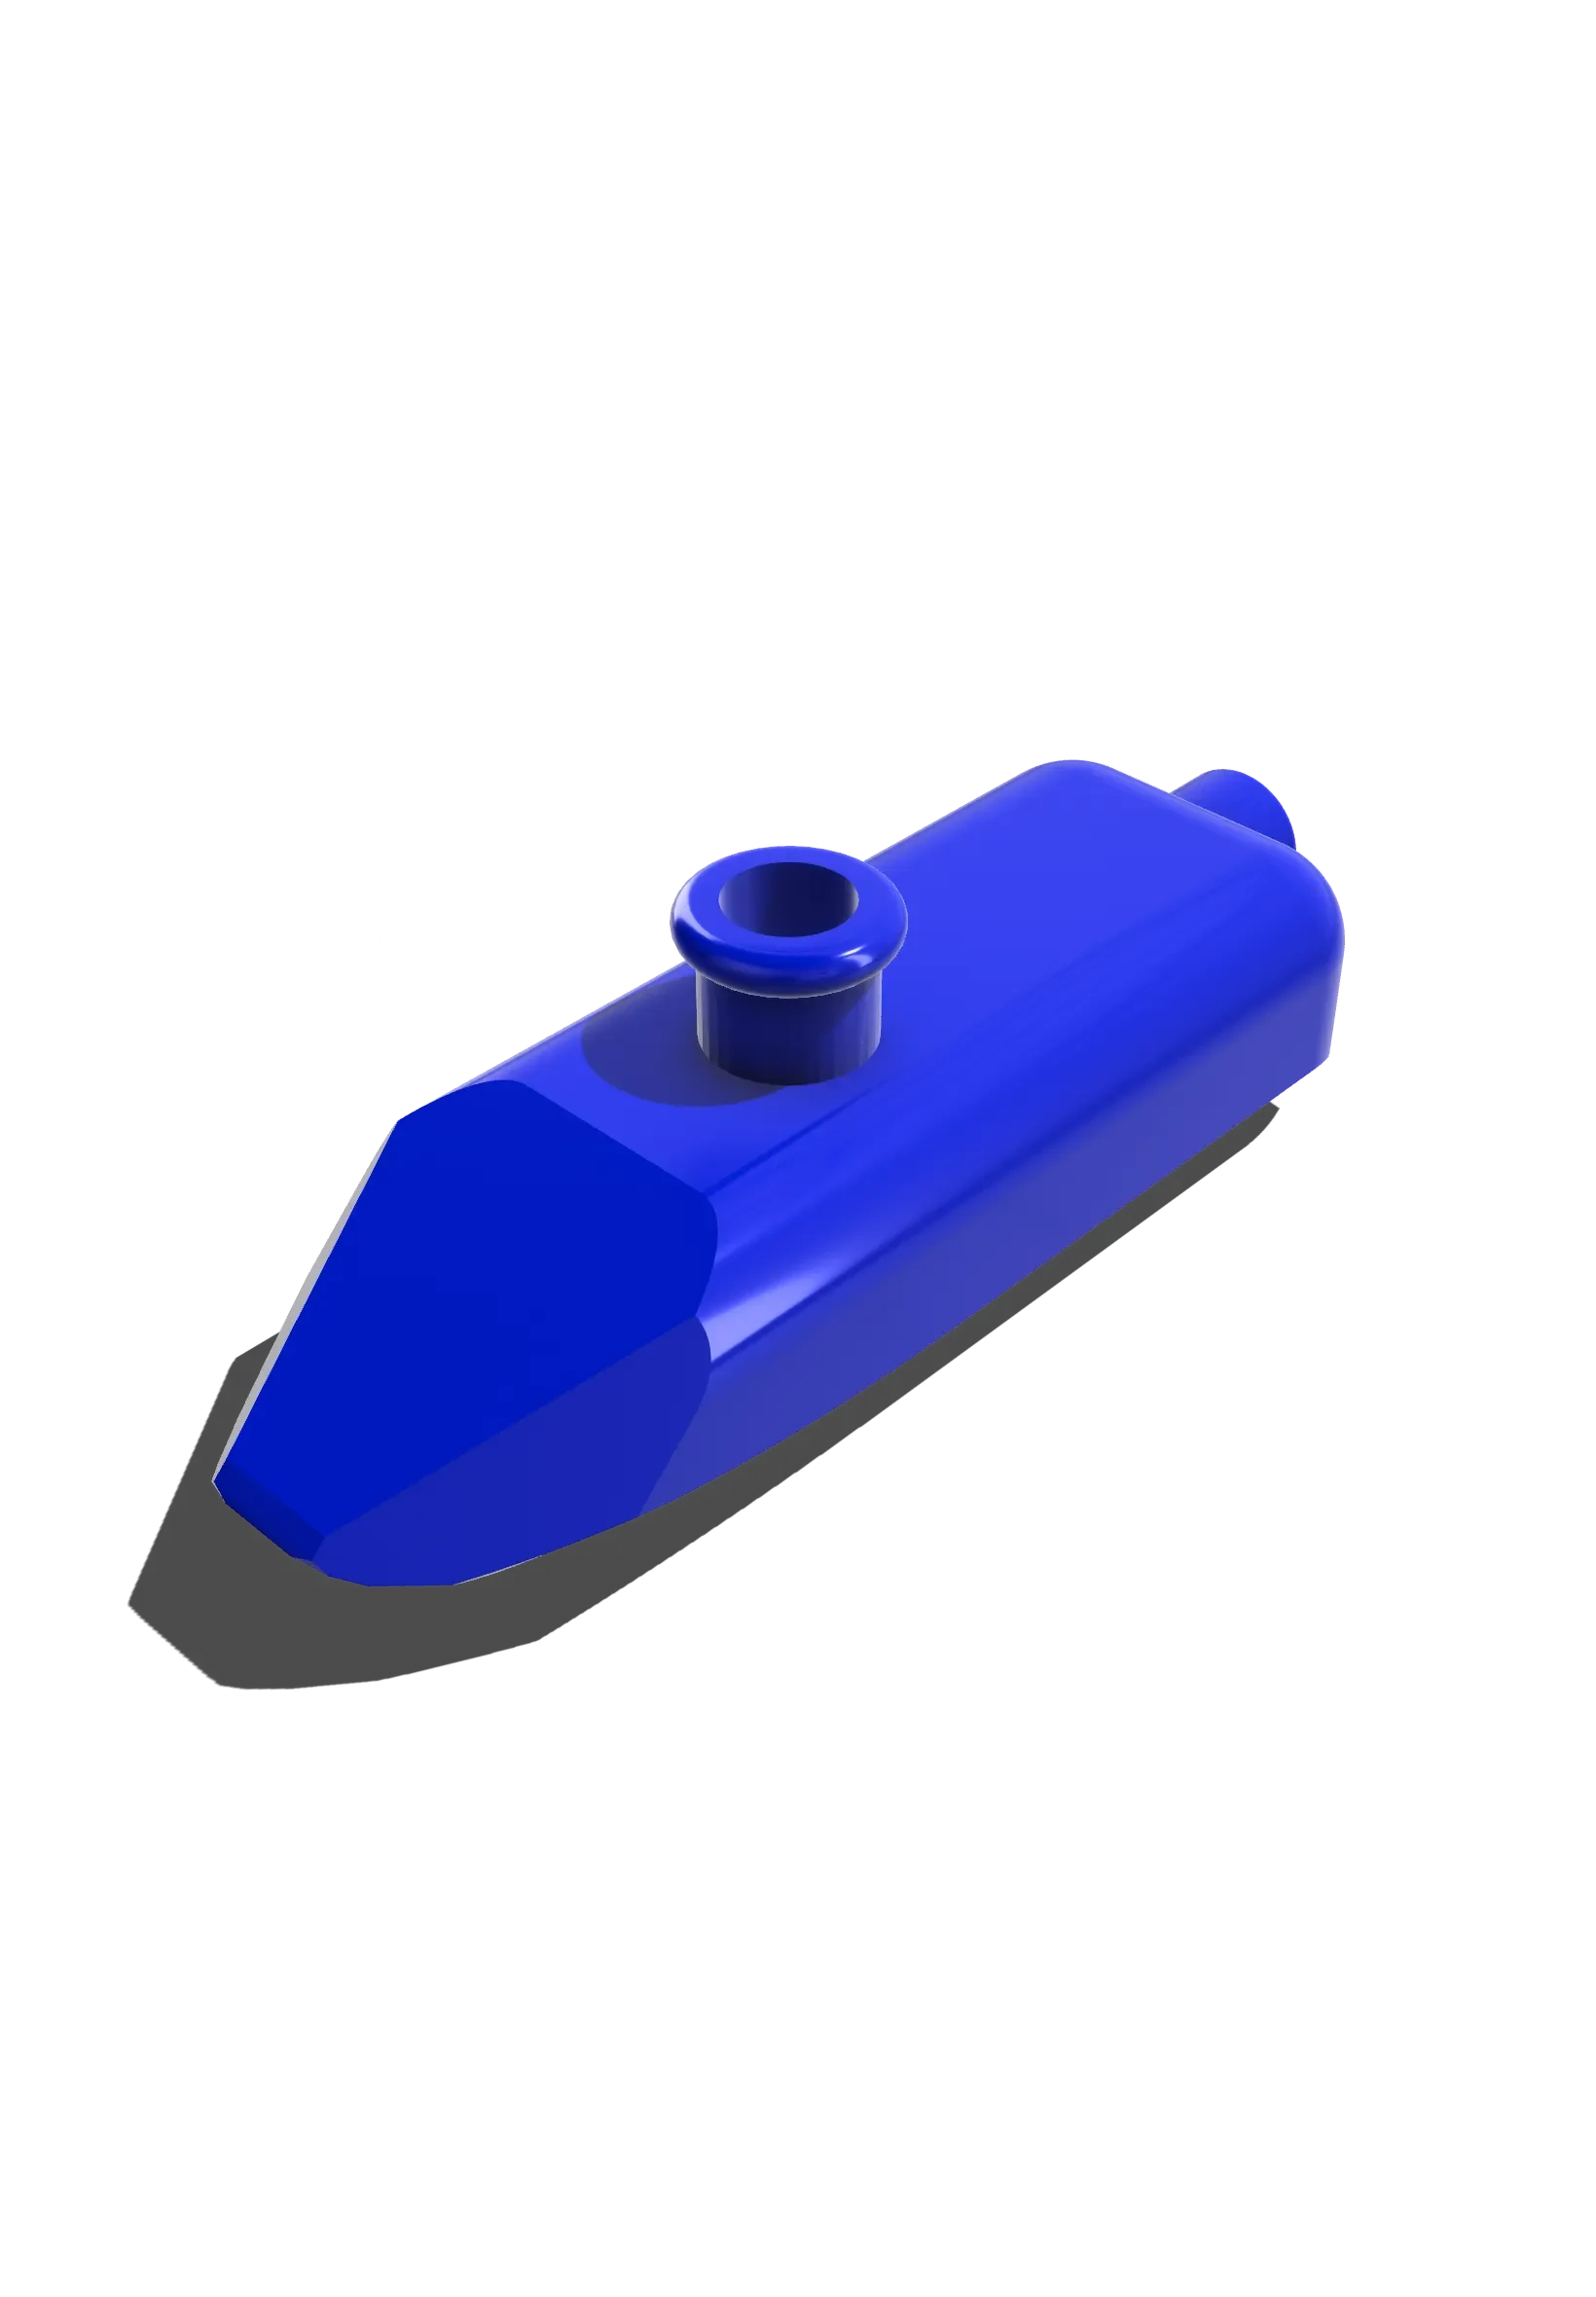 Balloon boat (Fast and light)